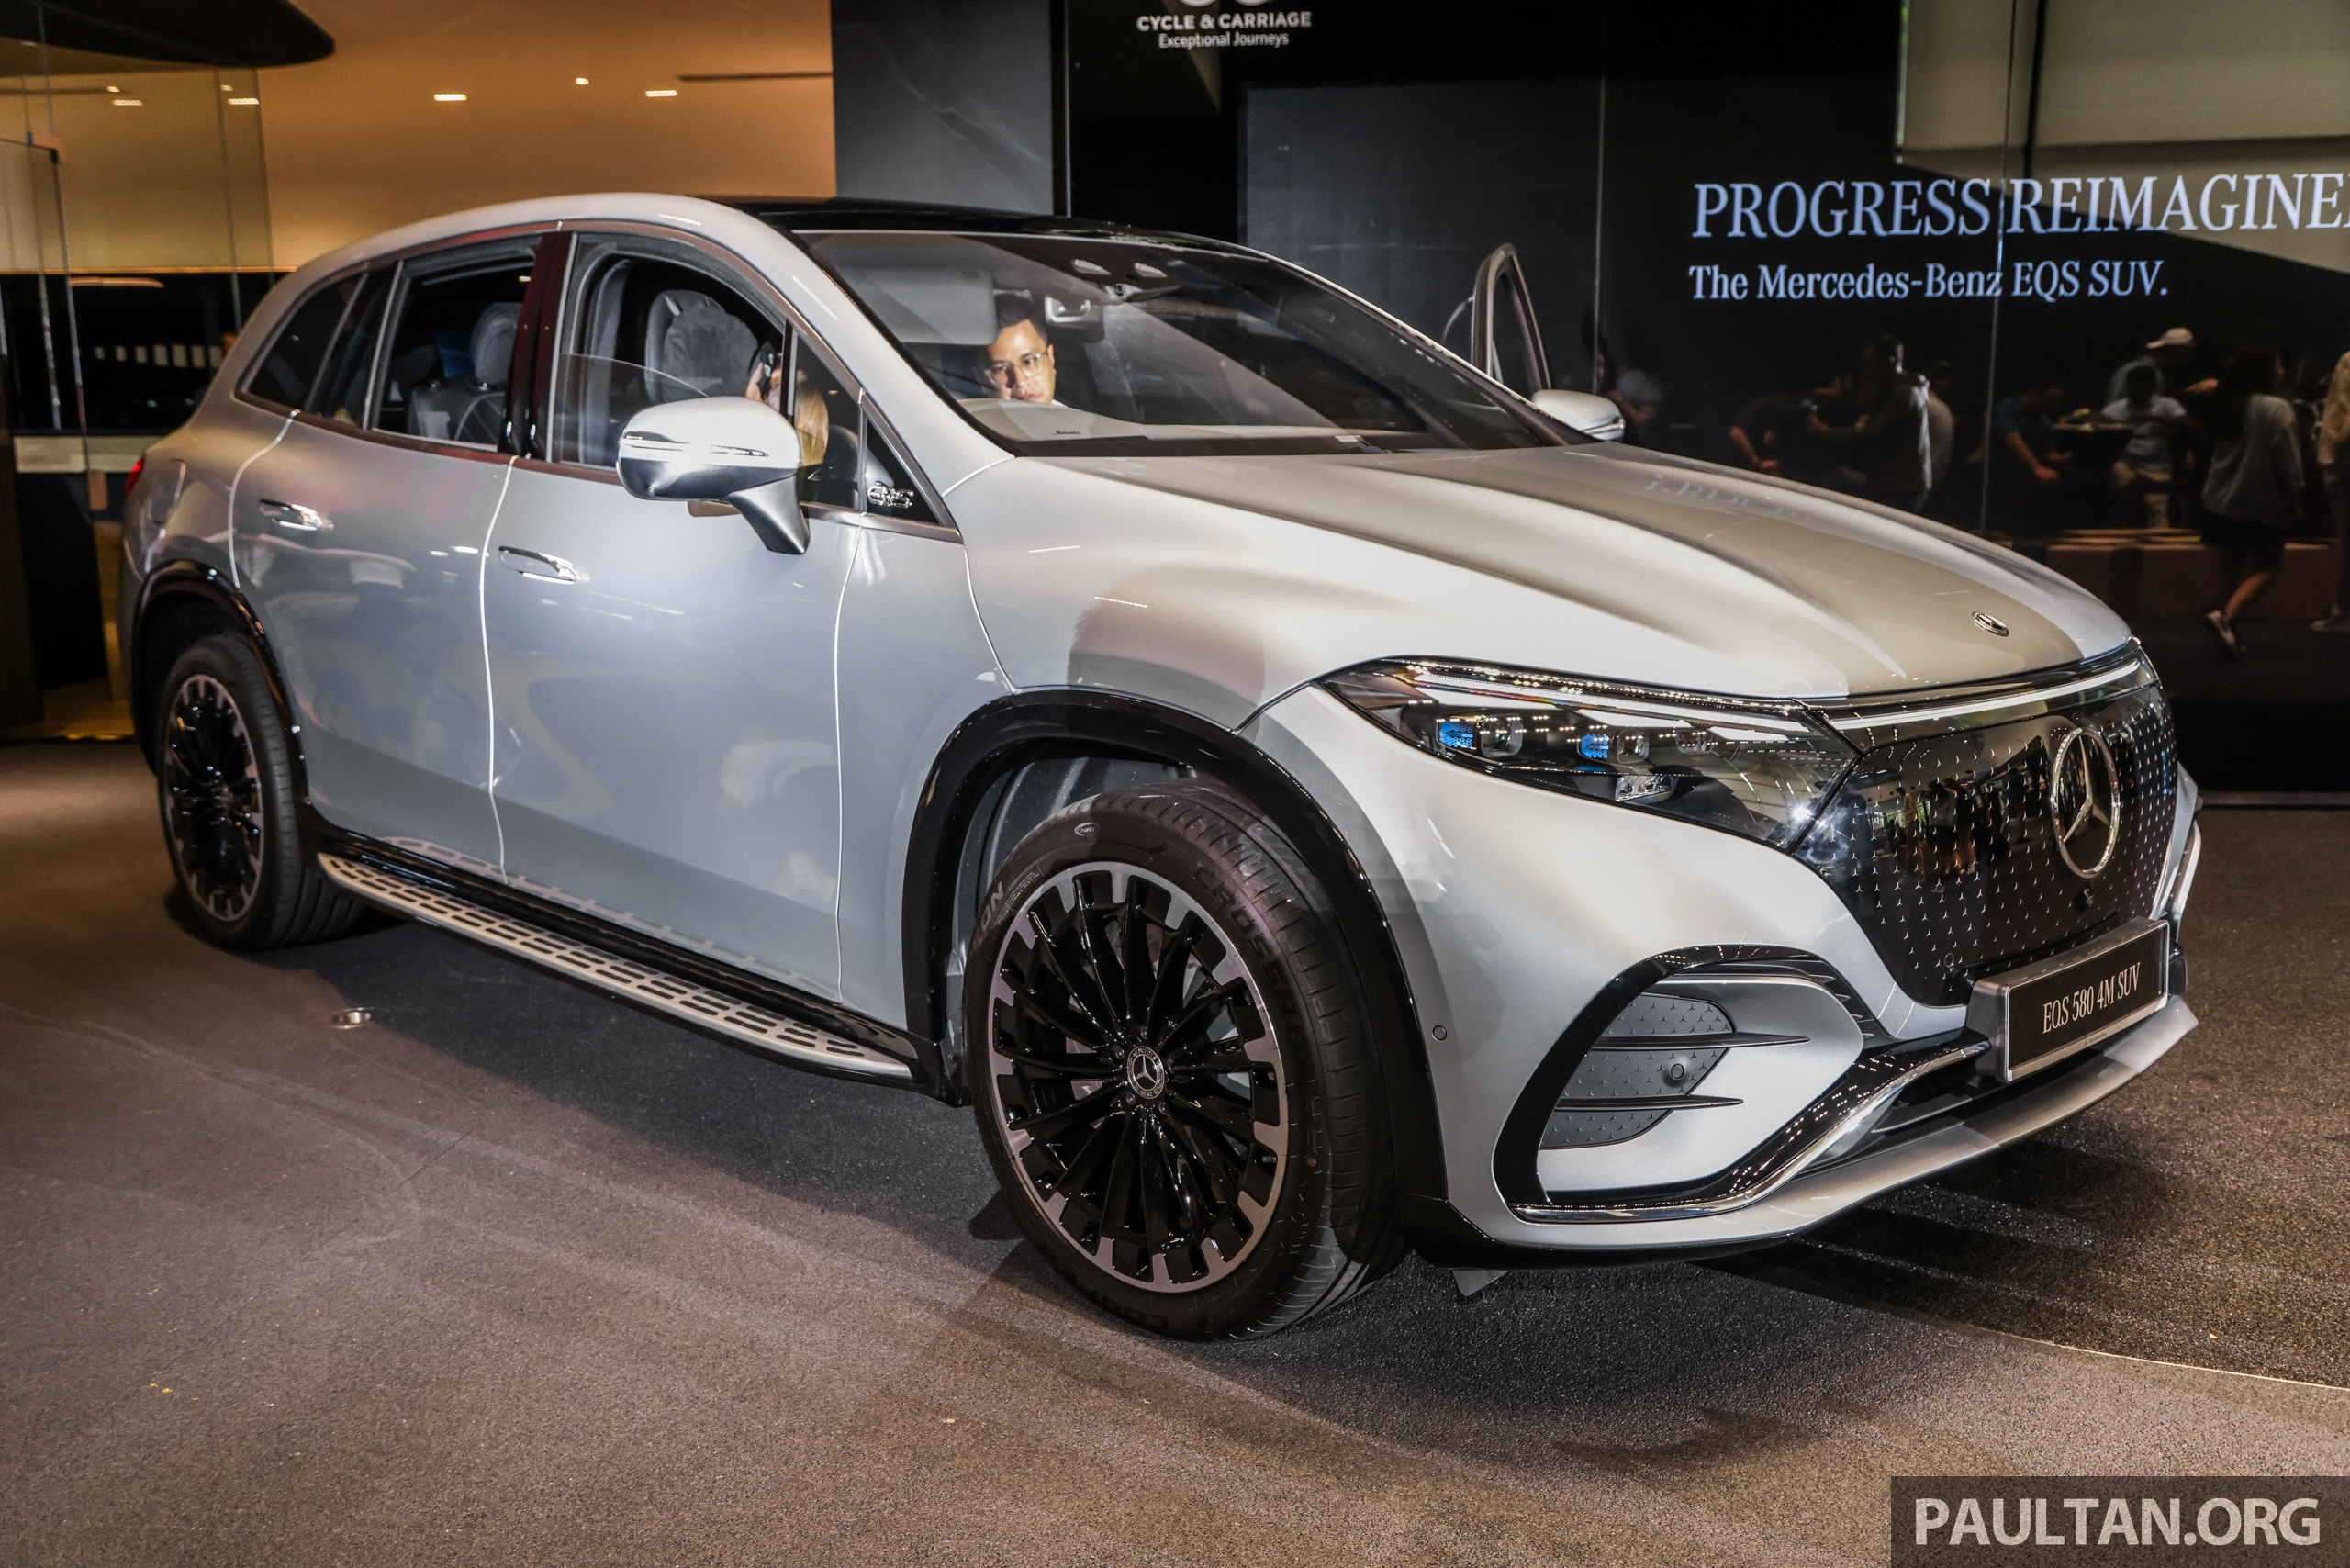 Mercedes-Benz EQS 580 4Matic SUV EV launched in Malaysia - 544 PS